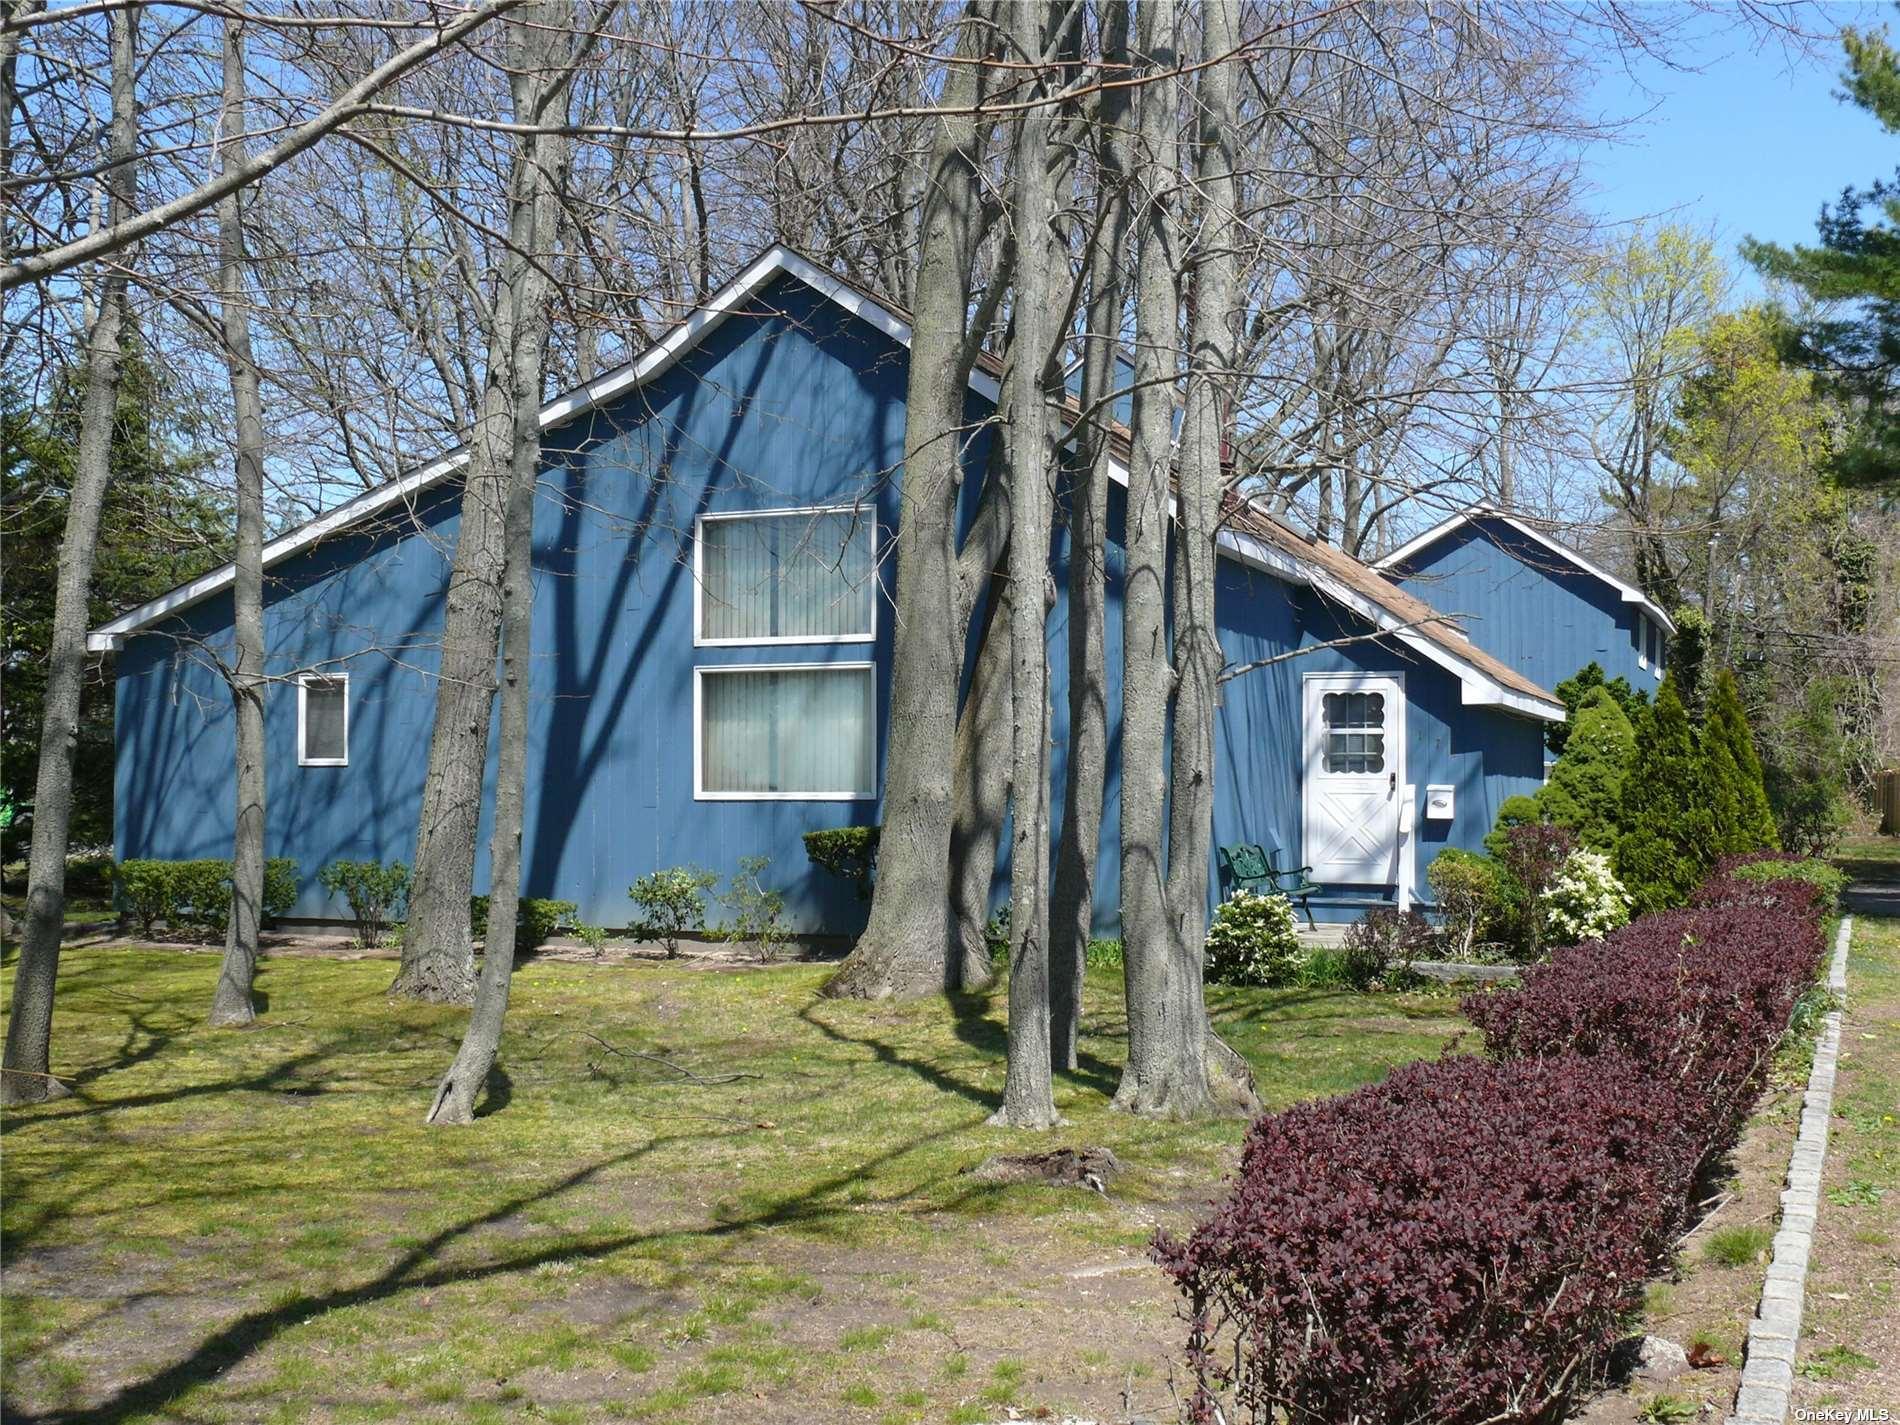 172 Concourse East in Long Island, Brightwaters, NY 11718